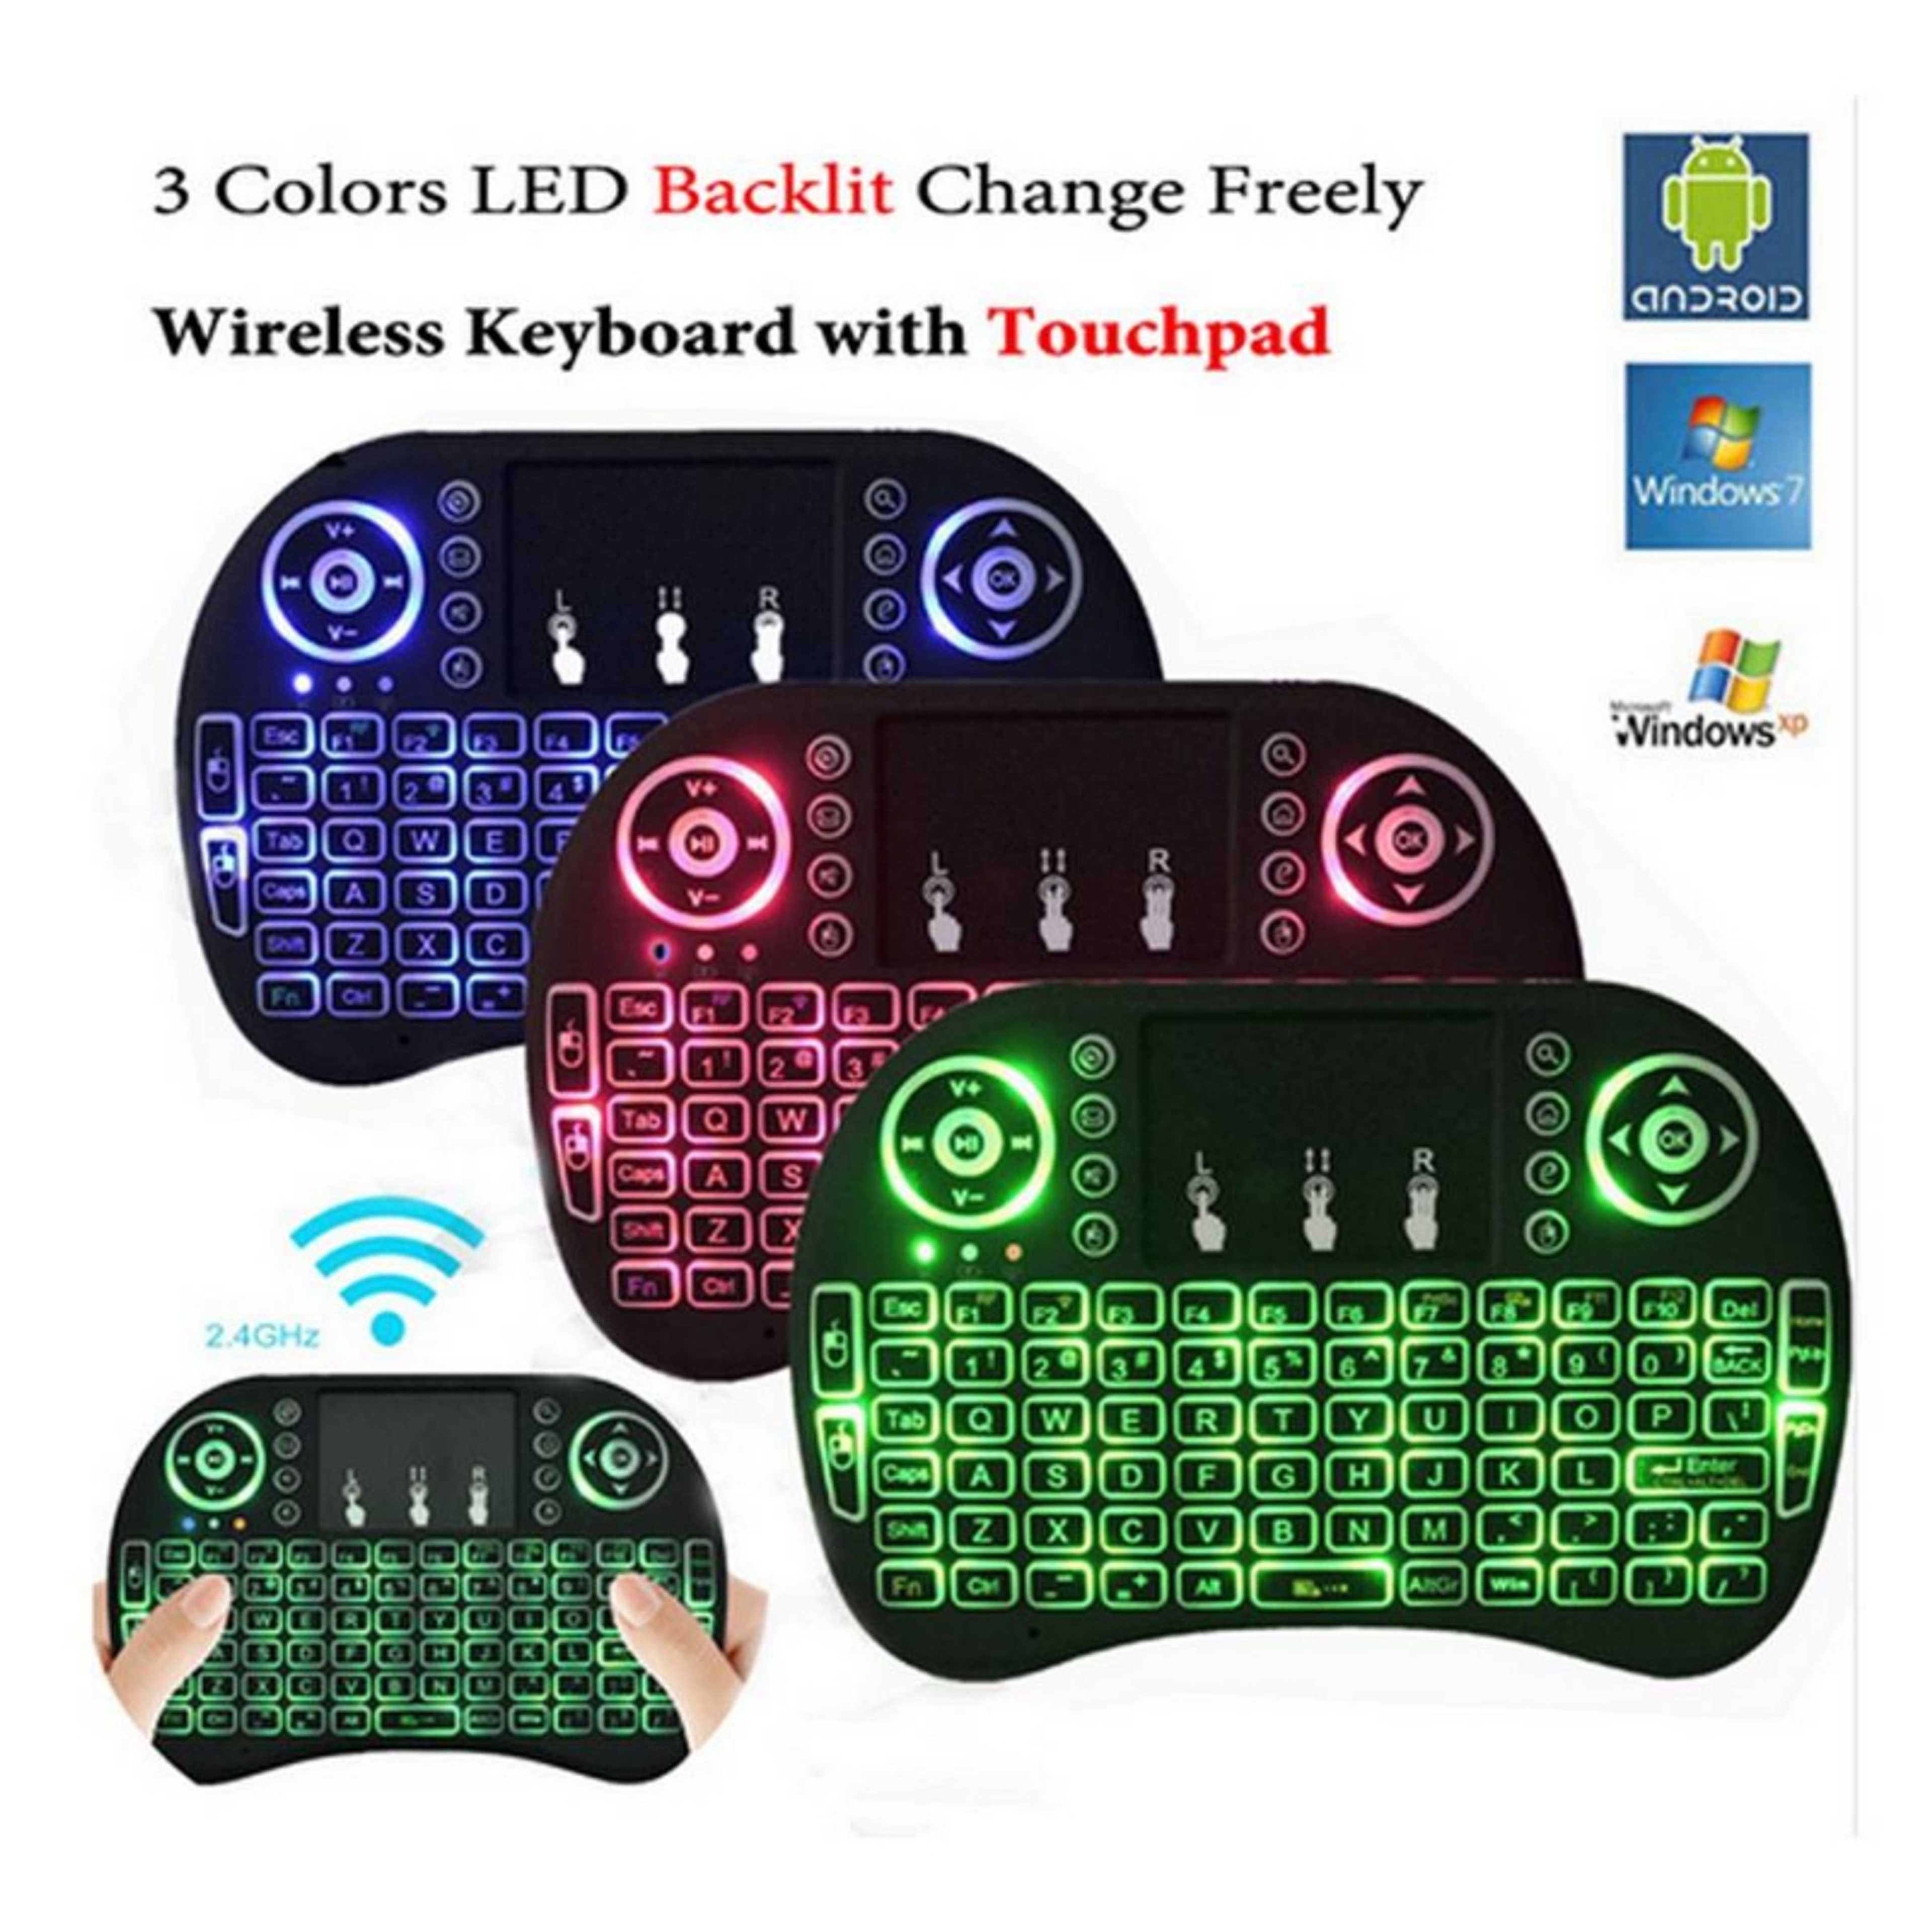 Mini Wireless Keyboard RF-500 with 3 Color RGB Backlit, 2.4GHz Wireless Mini Keyboard Rechargeable Controller with Touchpad Mouse Combo, Compatible with Android TV Box, IPTV, HTPC, Smart TV, PC,etc